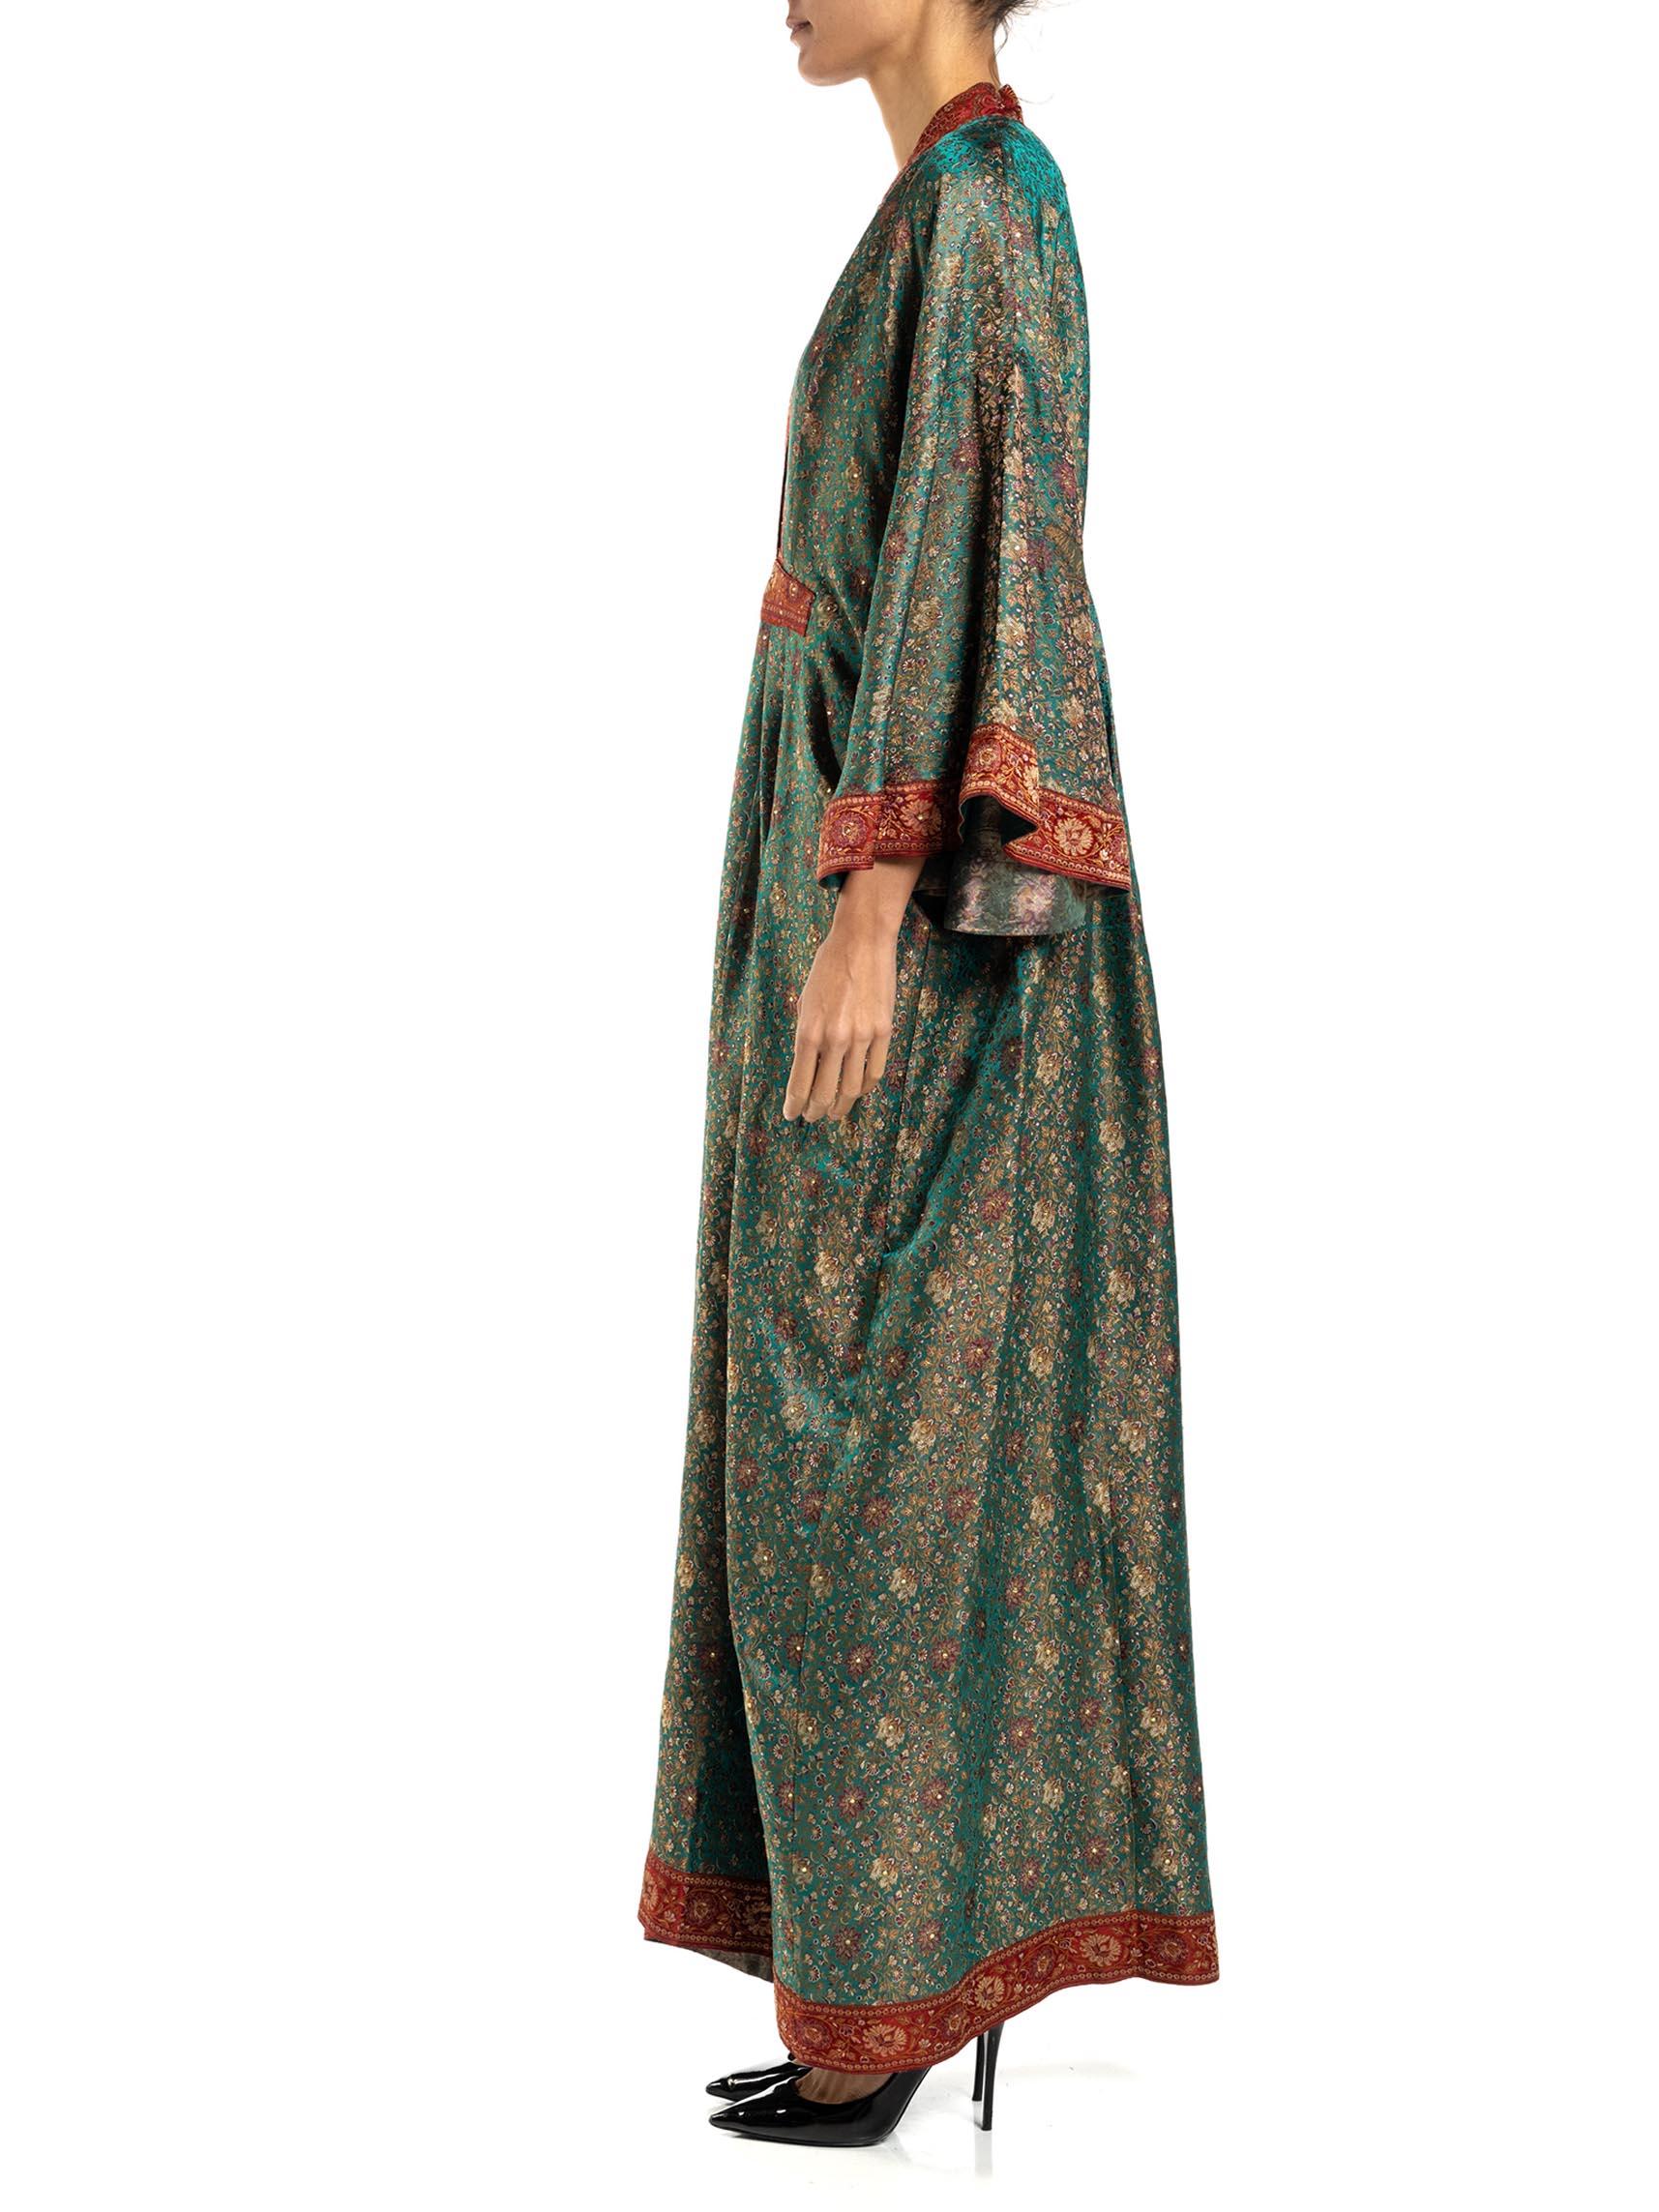 MORPHEW COLLECTION Teal & Burgundy Floral Silk Studded Kaftan Made From Vintage In Excellent Condition For Sale In New York, NY